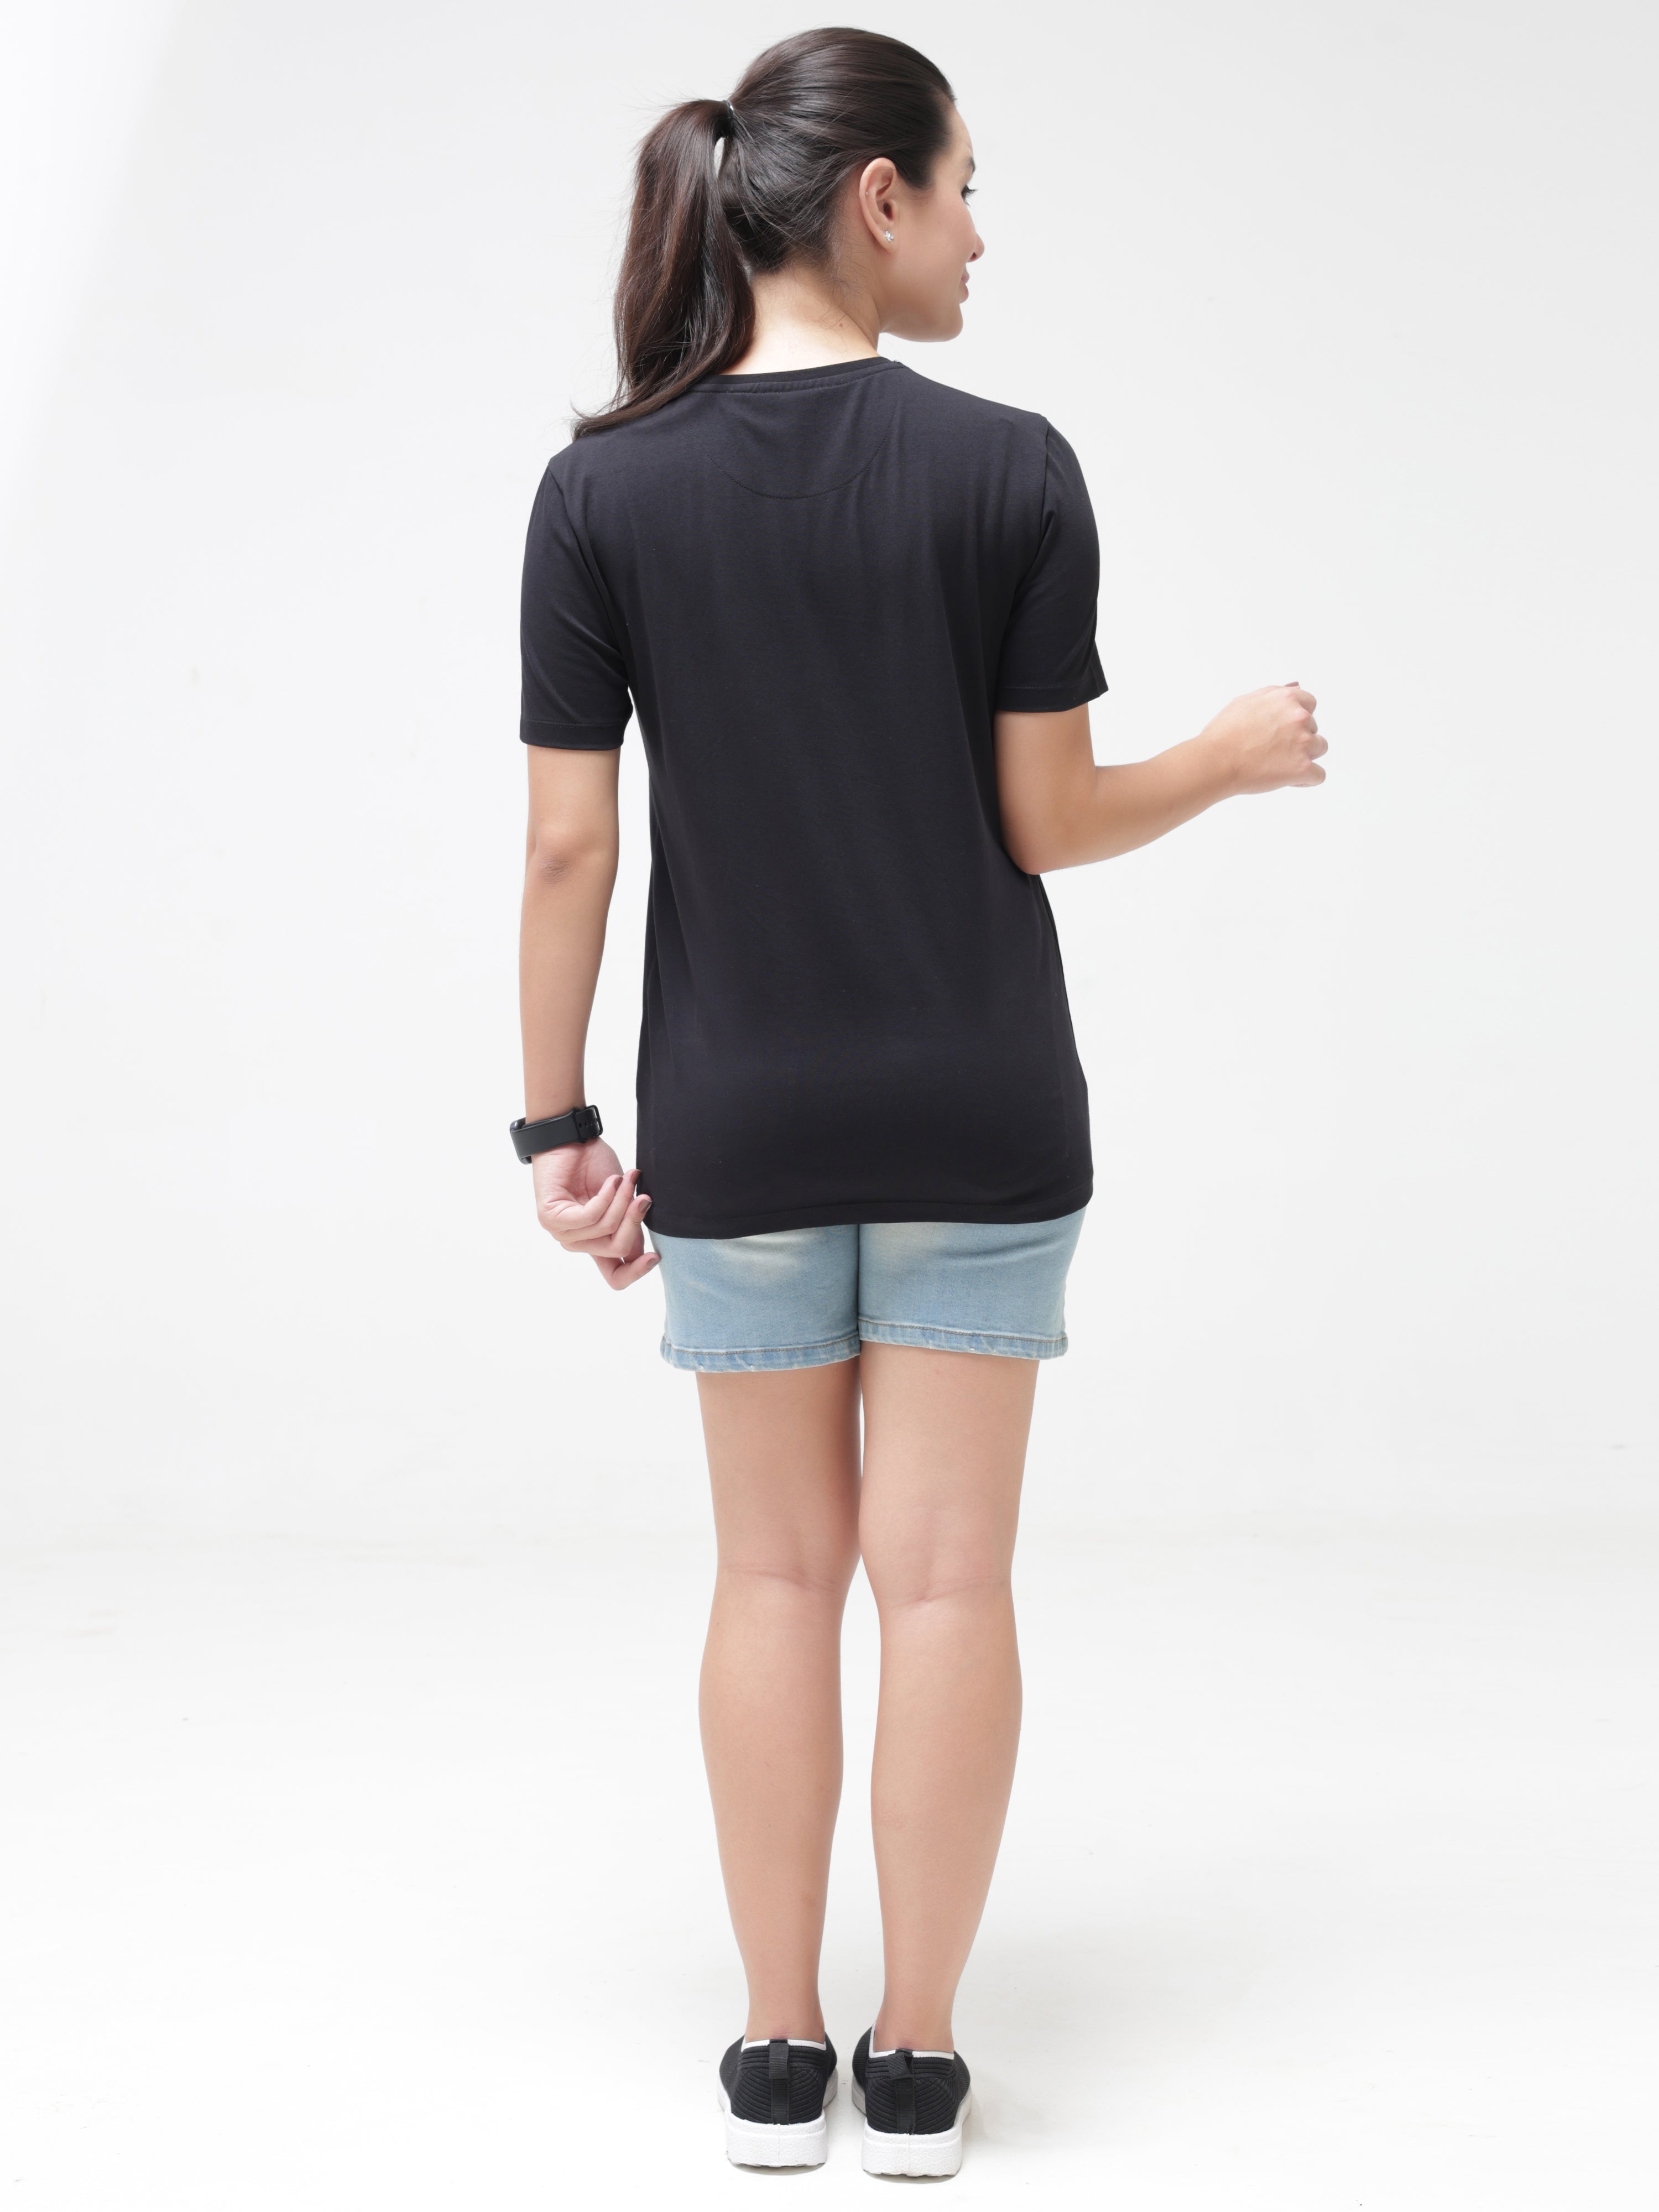 Woman wearing black anti-stain, anti-odour Turms T-shirt with round neck and denim shorts. Stretchable and tailored fit, trending intelligent apparel.